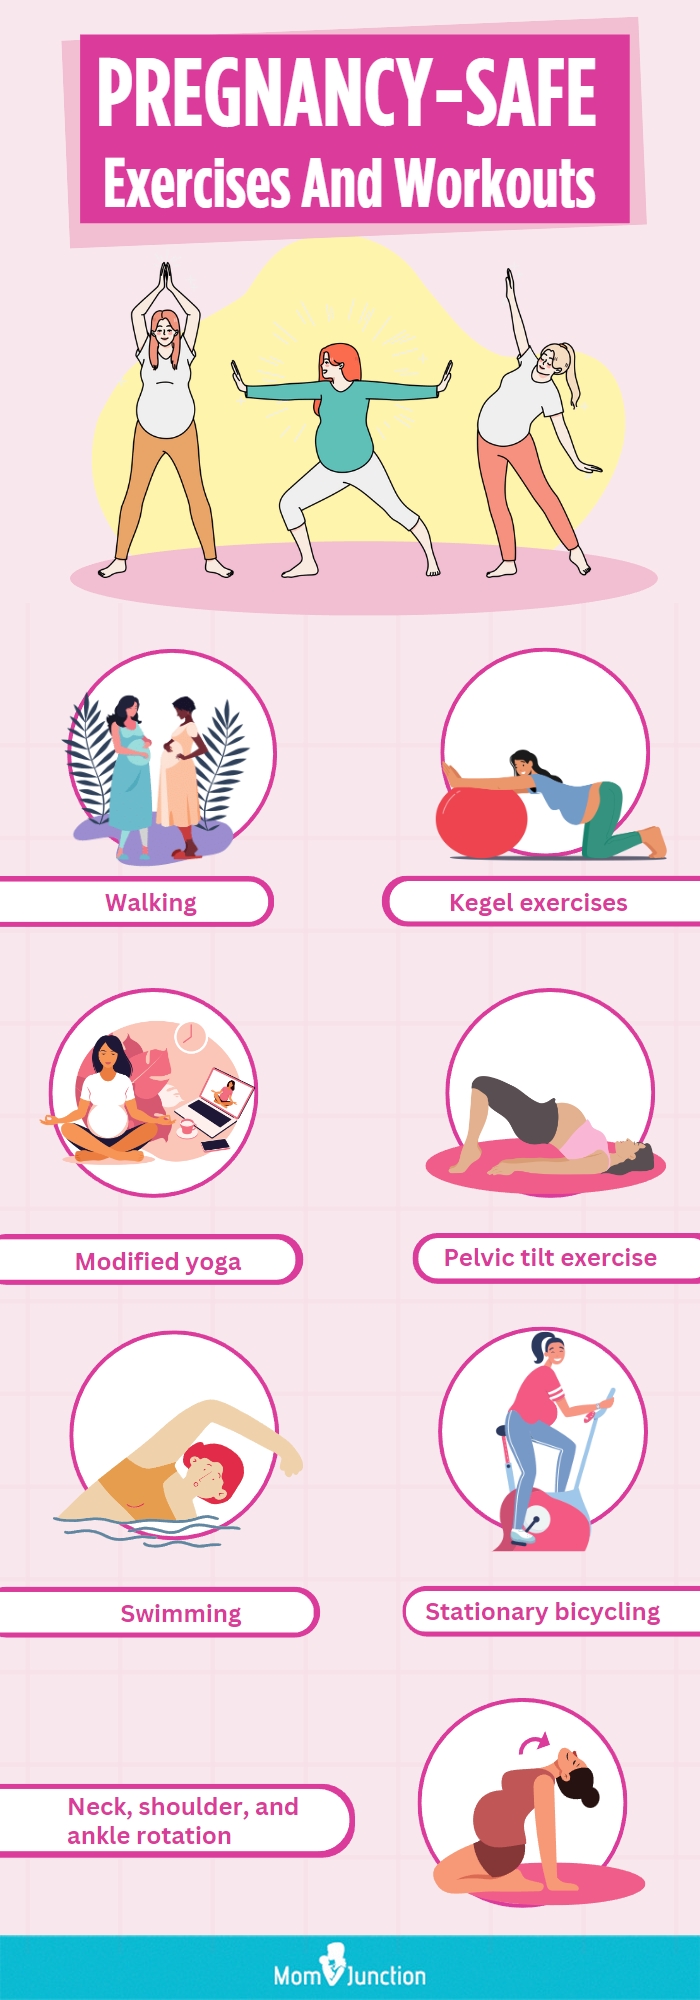 Exercising for Two: How to Maintain Fitness During Pregnancy